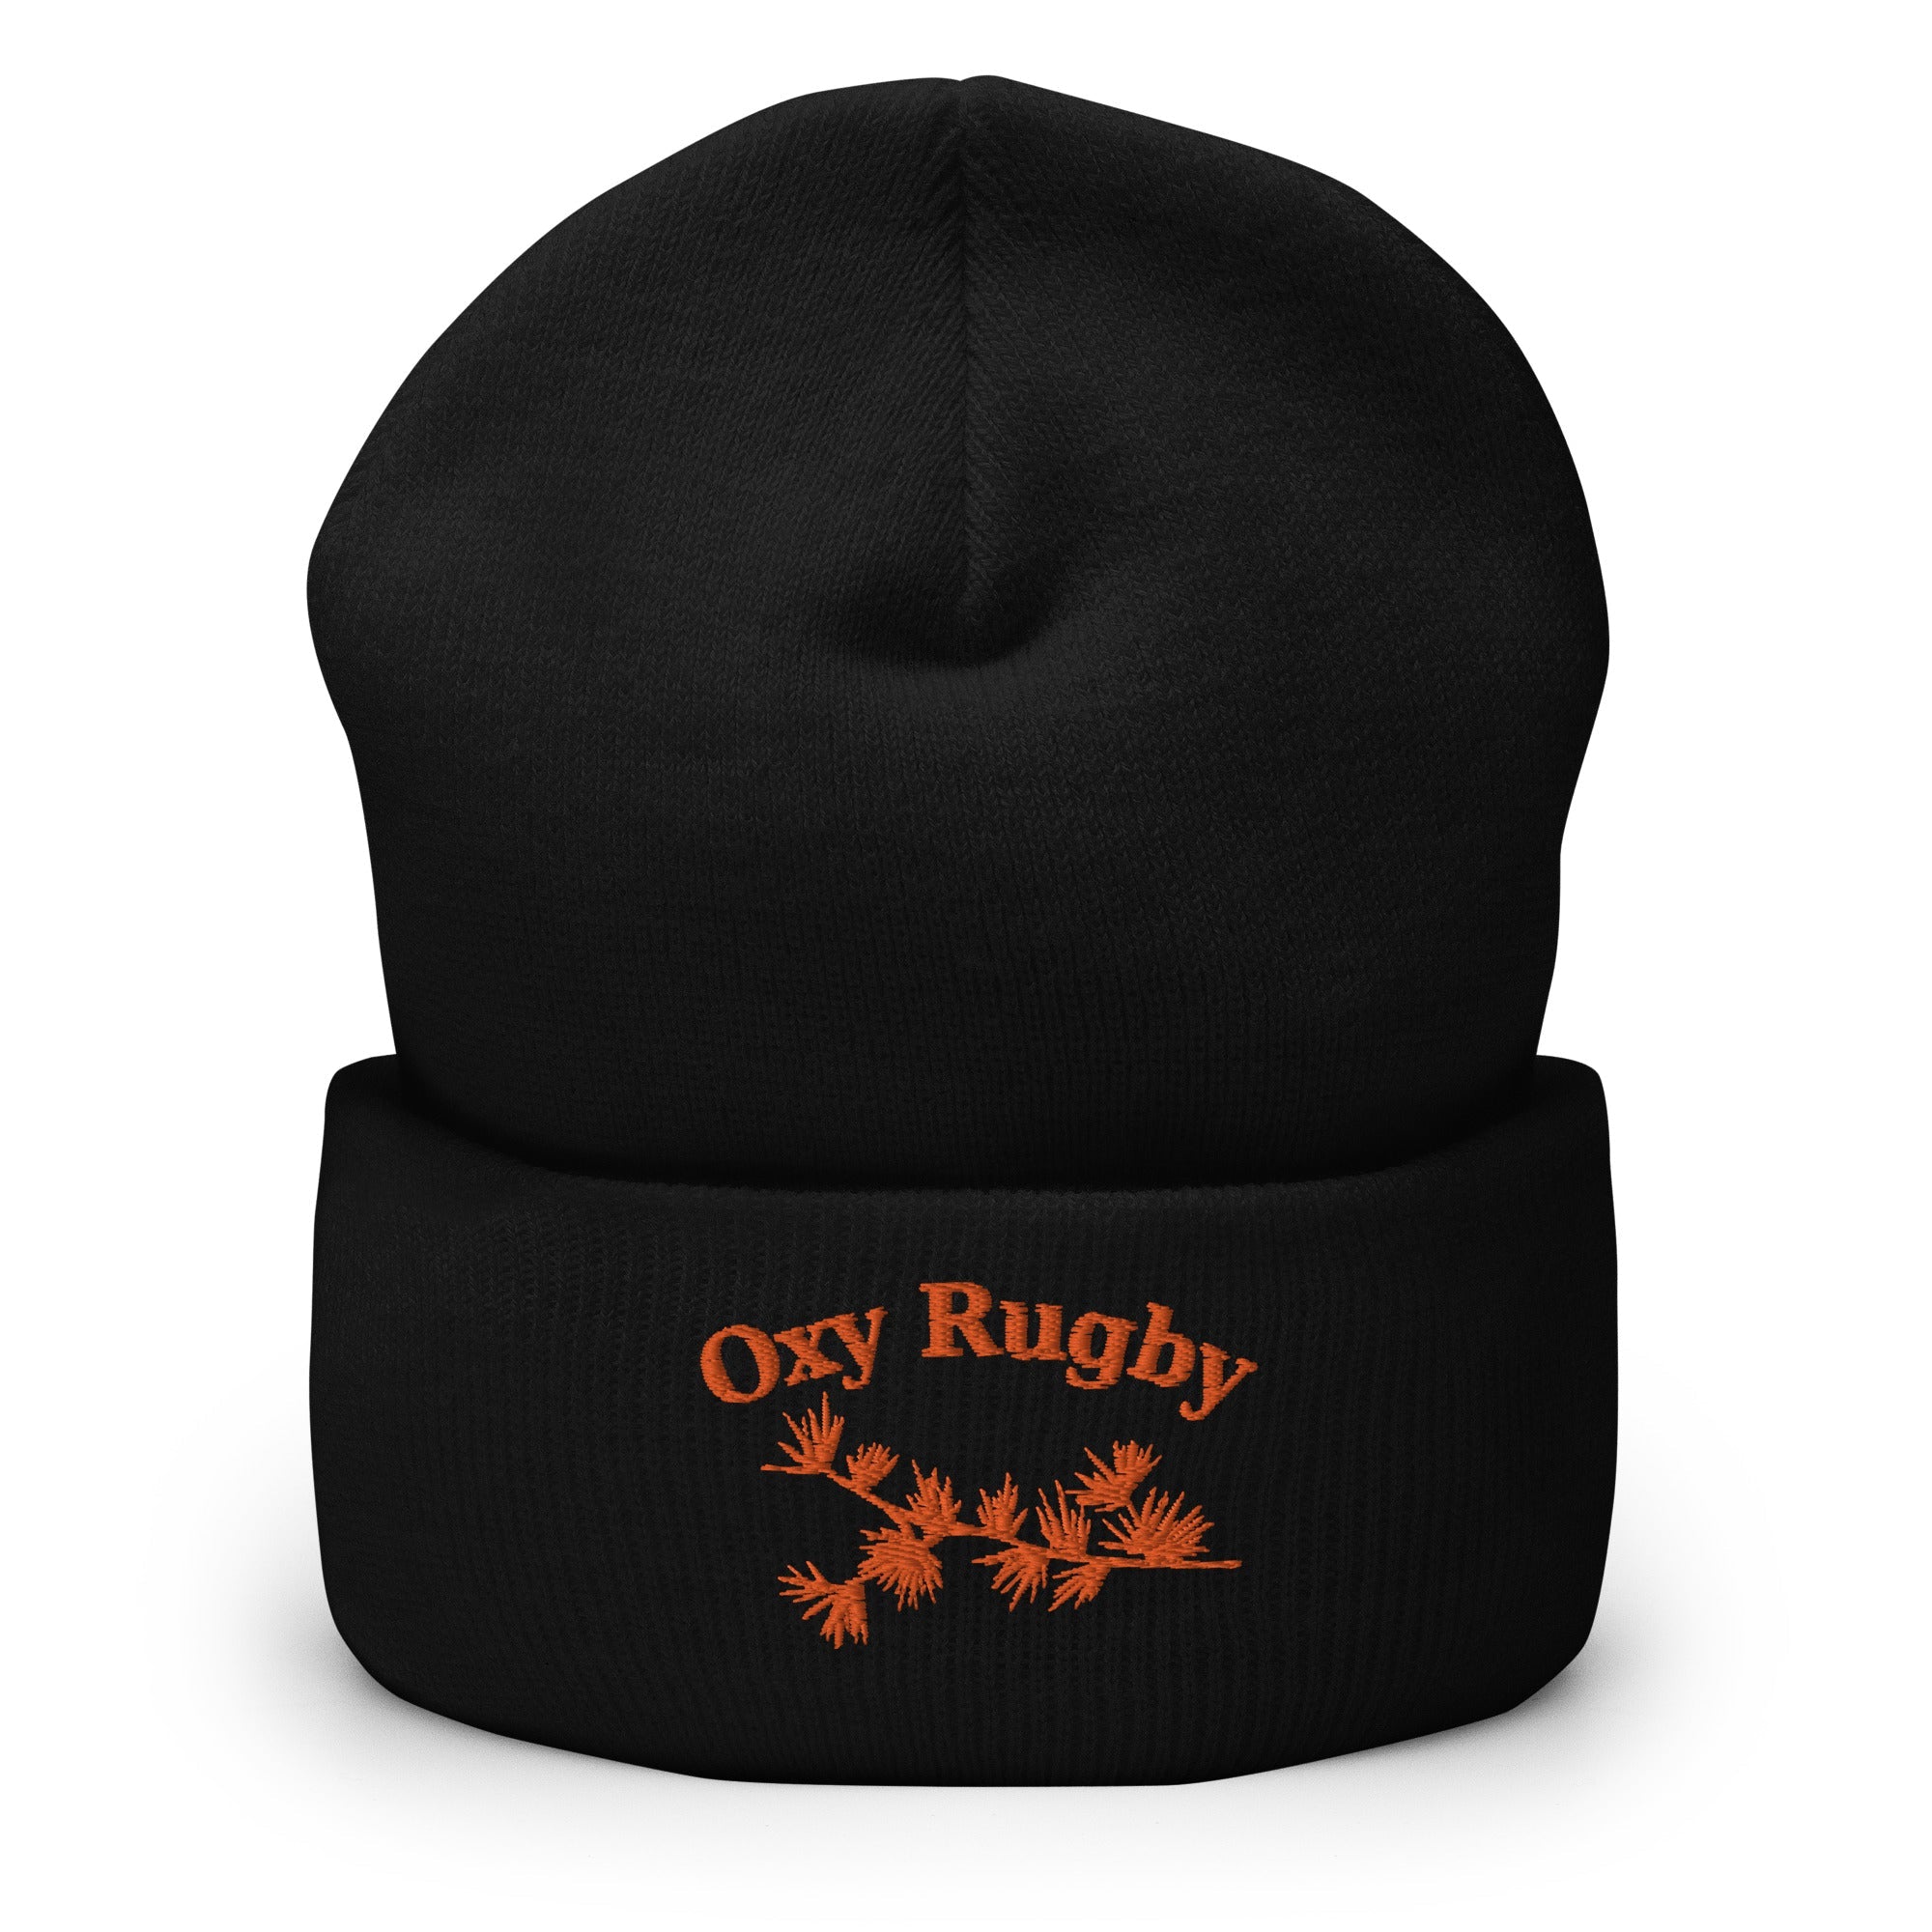 Rugby Imports Oxy Rugby Cuffed Beanie